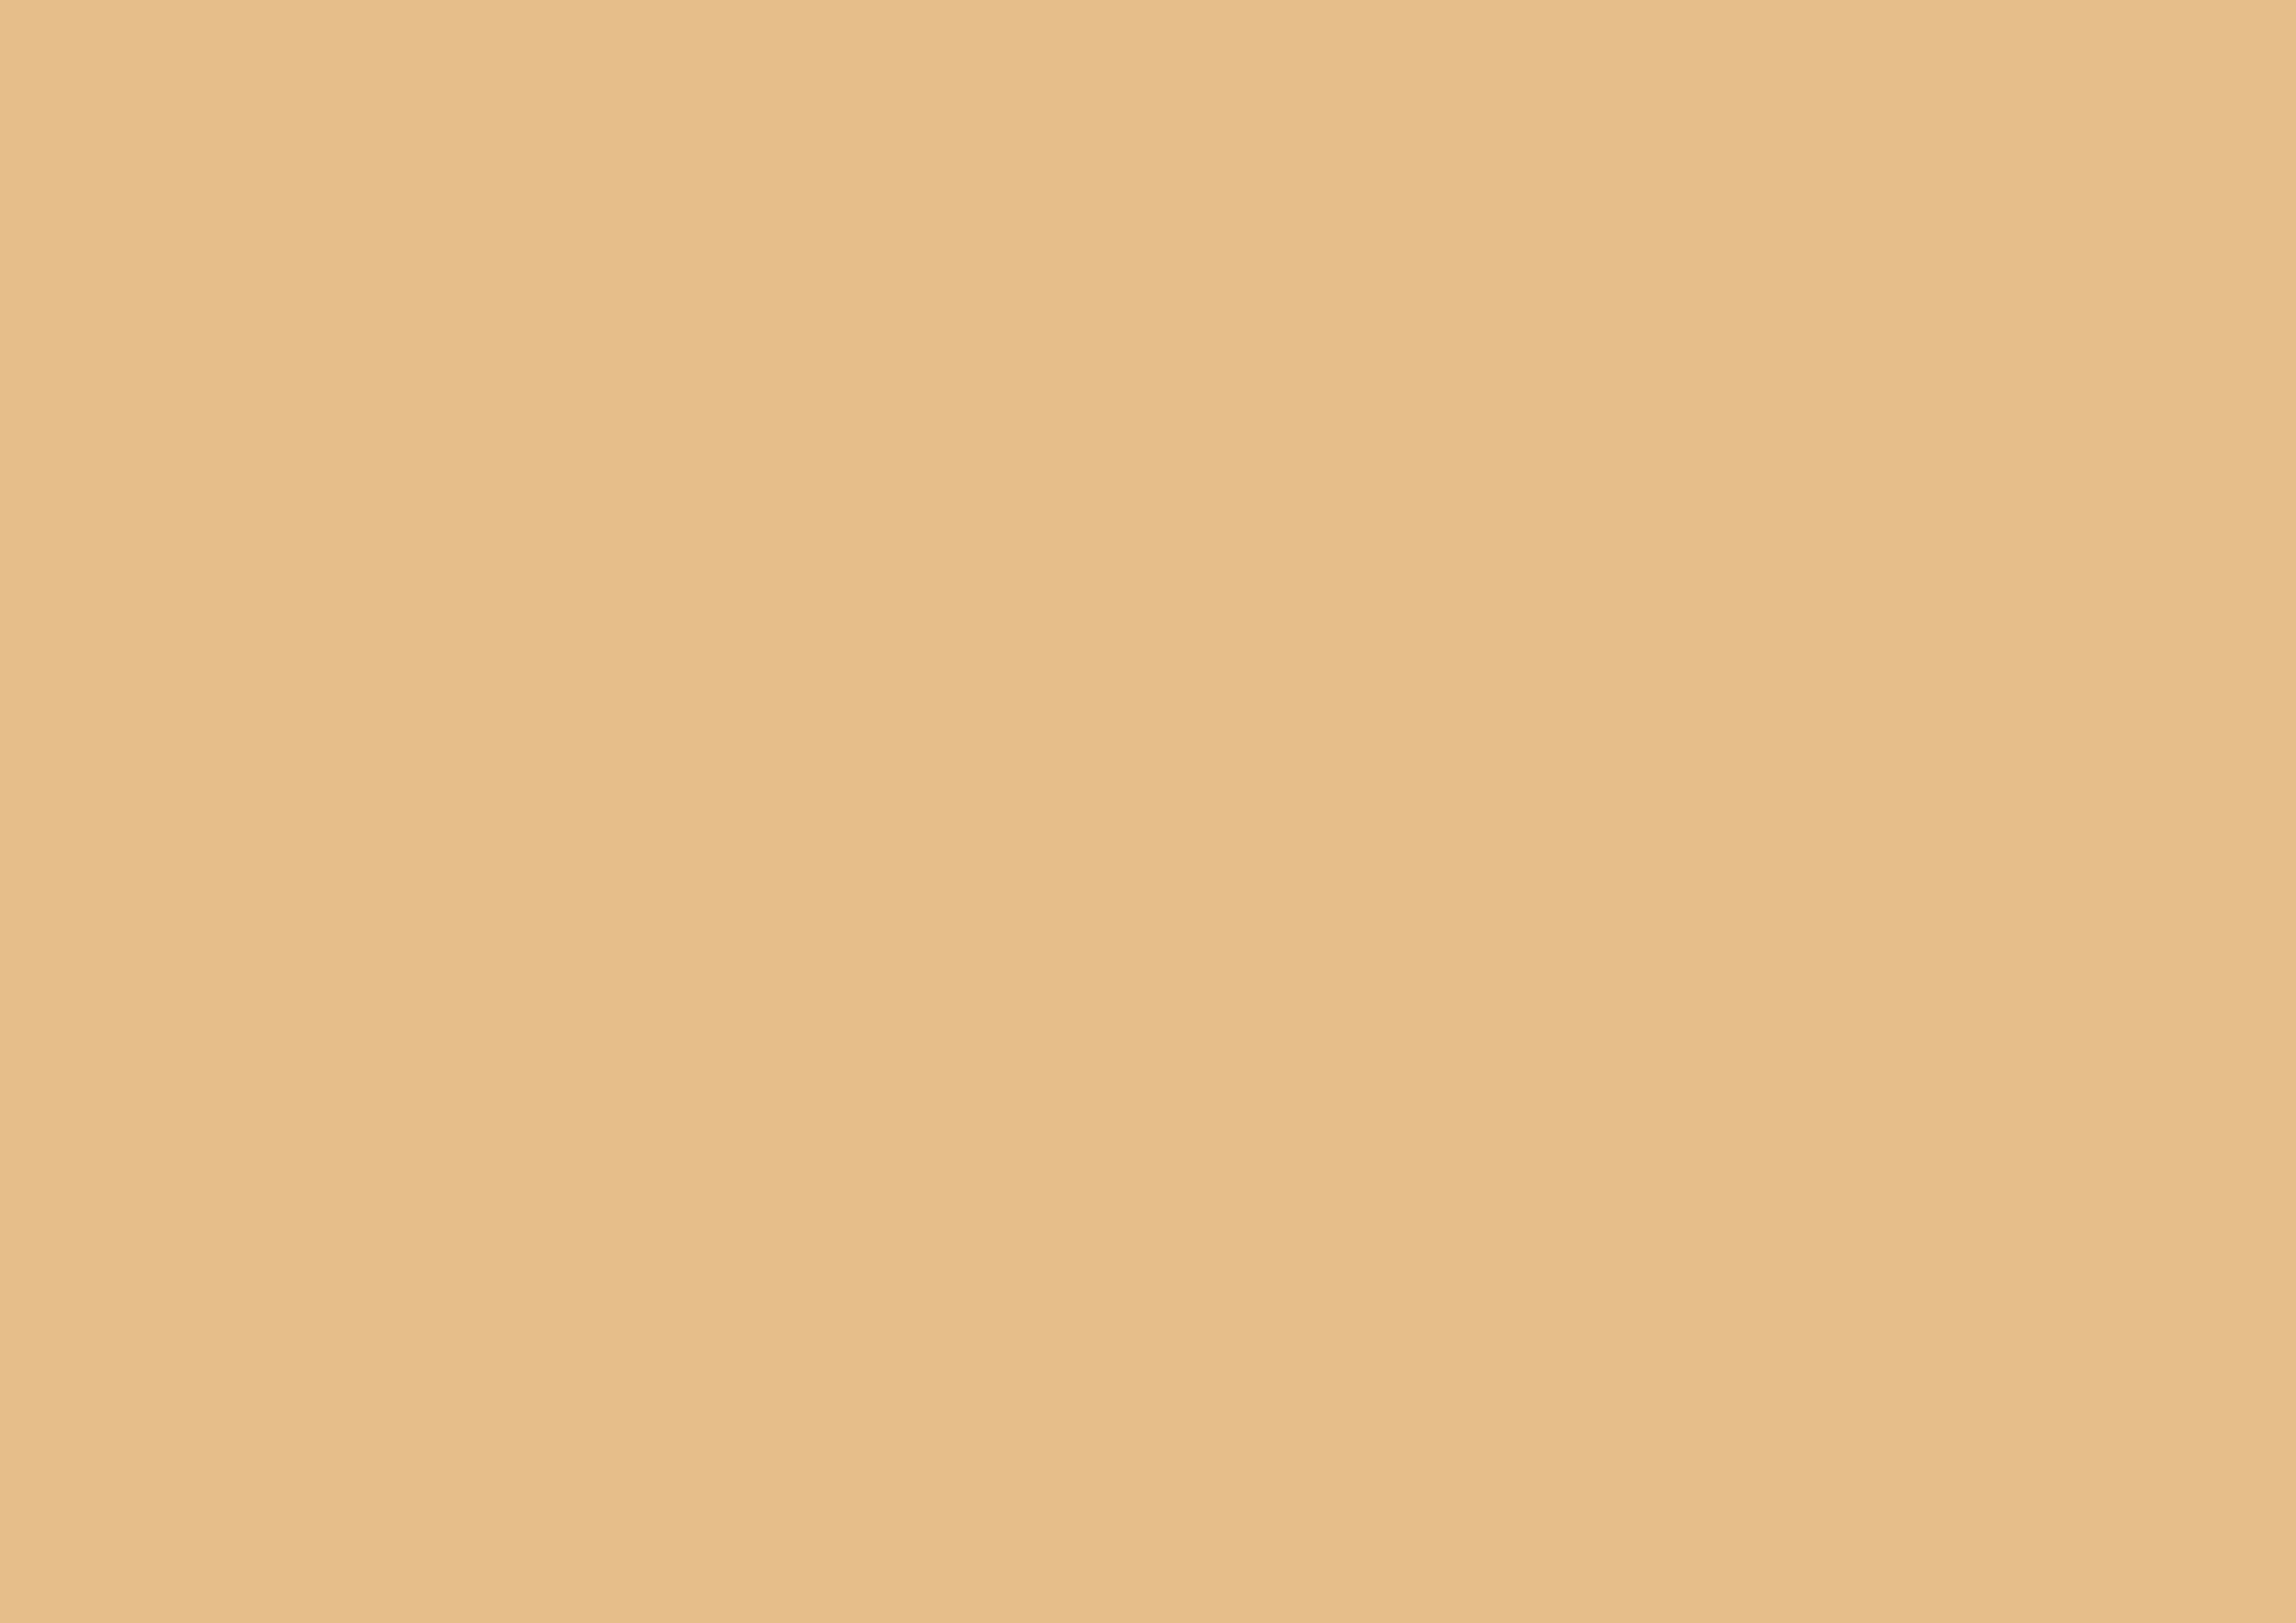 3508x2480 Pale Gold Solid Color Background